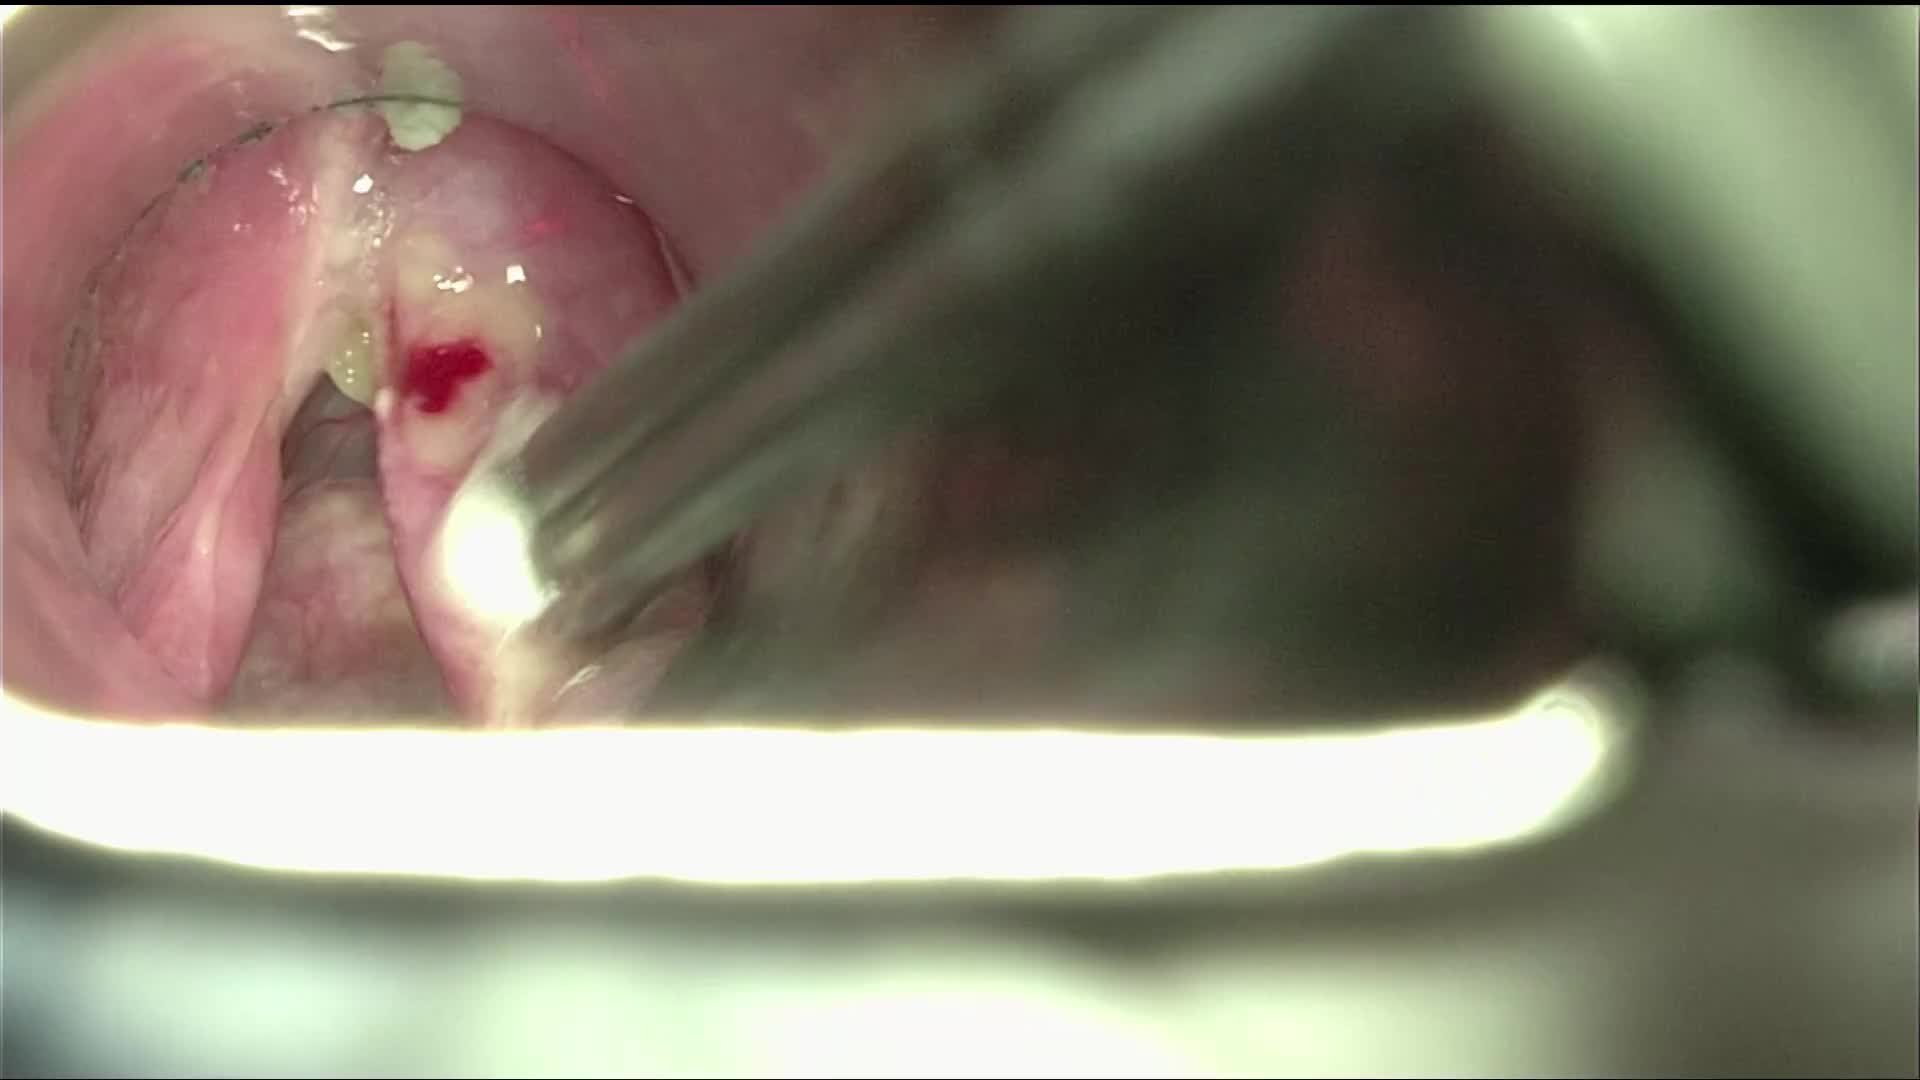 Tumor of the right vocal fold. Cordectomy type II. SSTOLM